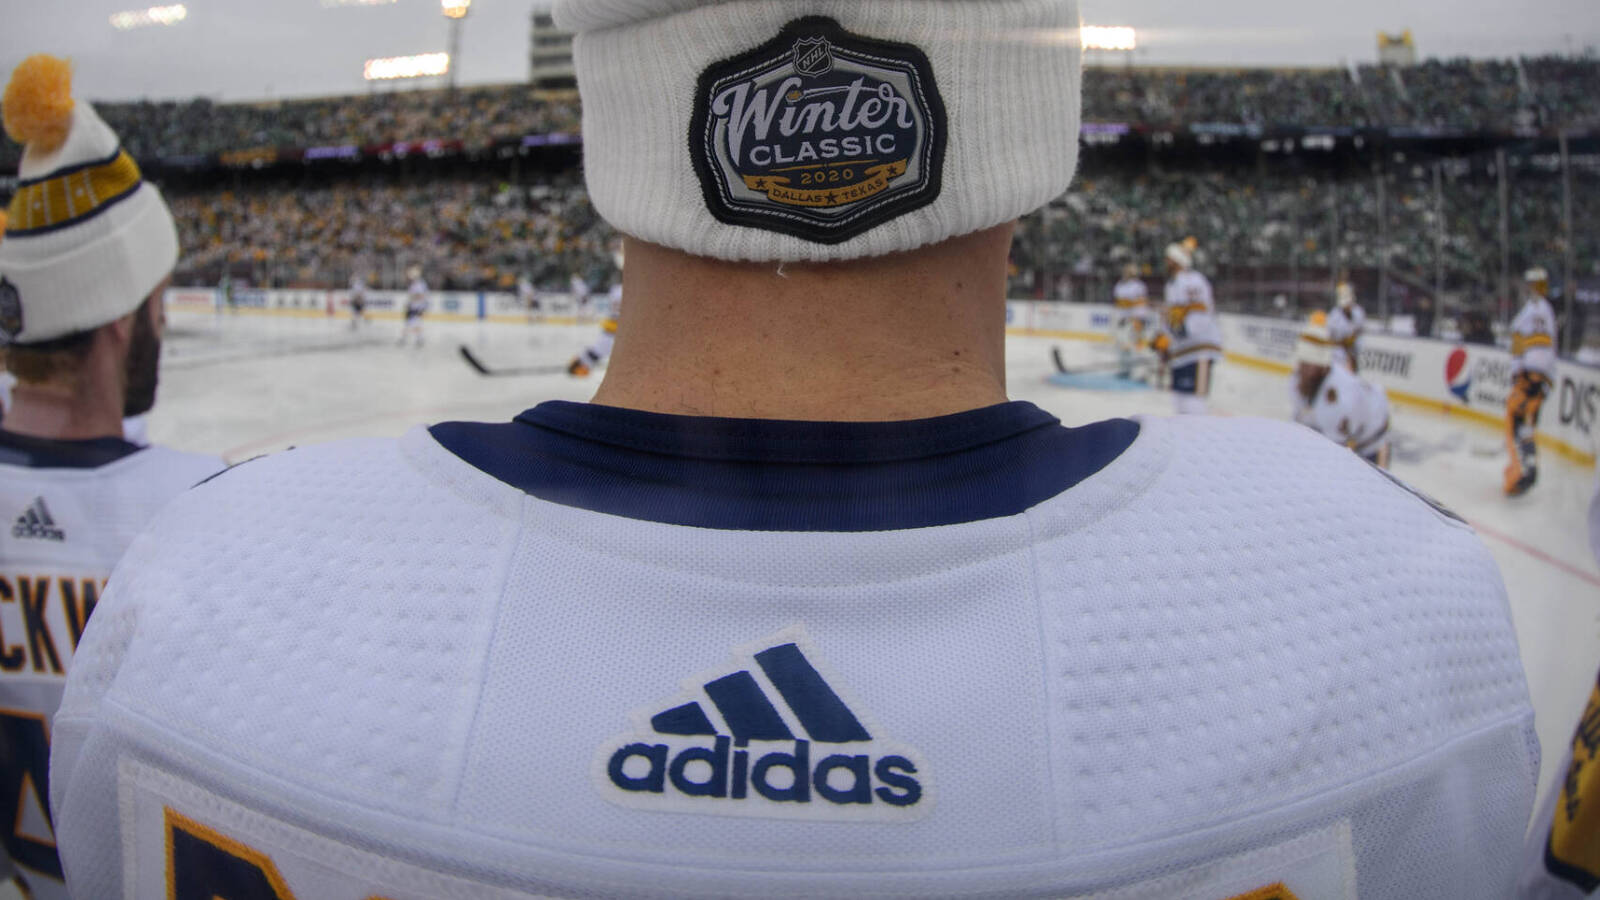 Adidas NHL jersey takeover: My thoughts a week before unveiling